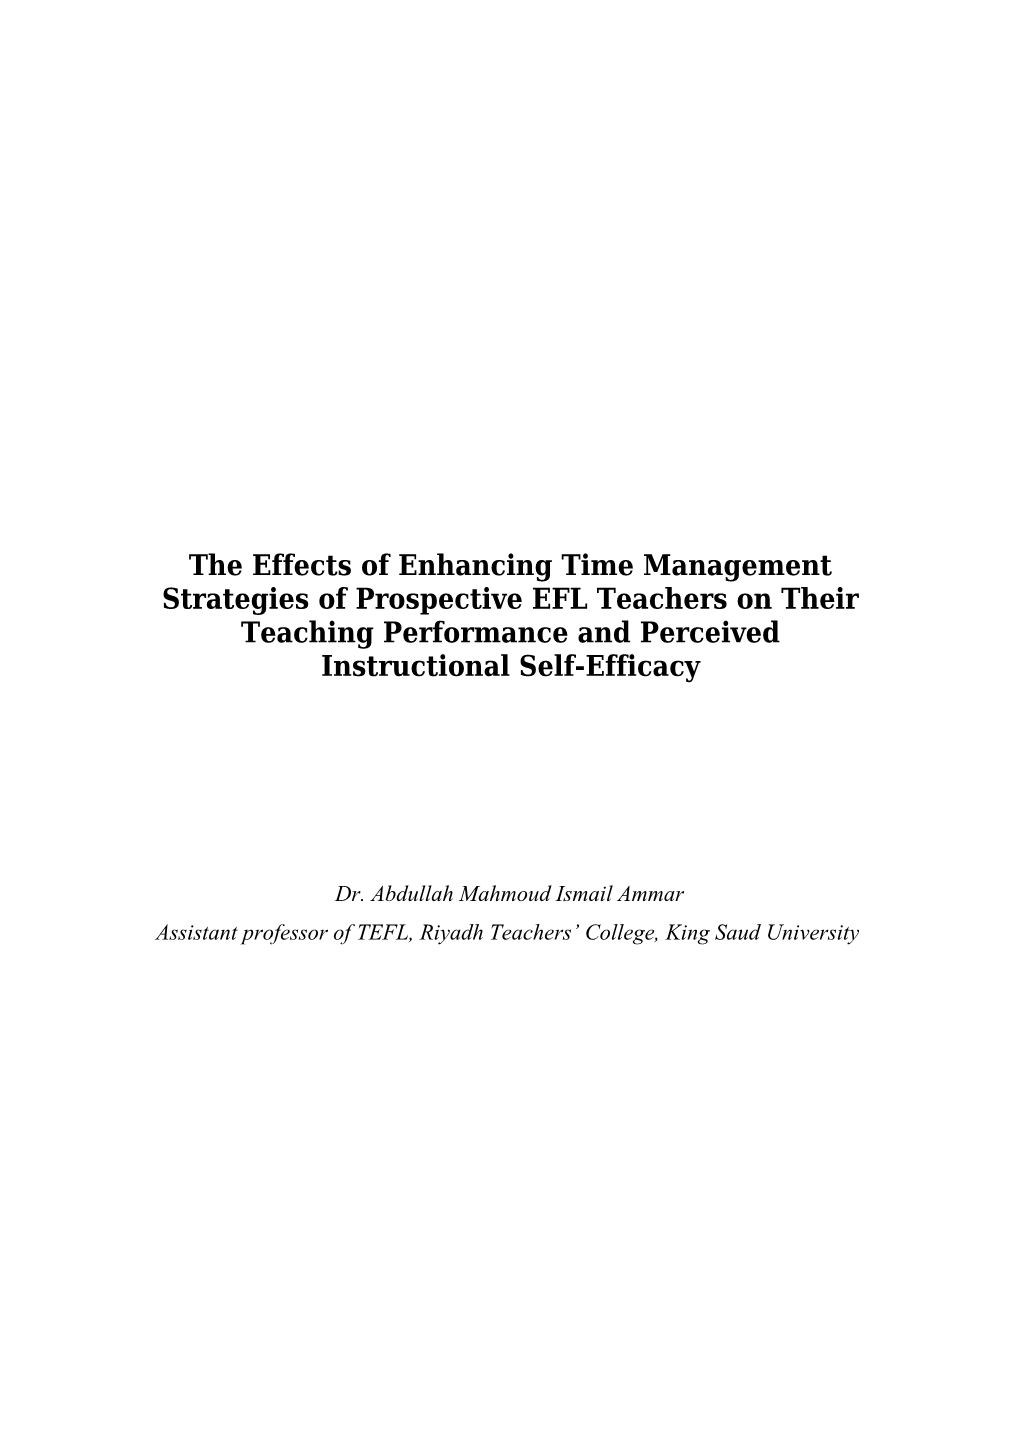 The Effects of Enhancing Time Management Strategies of Prospective EFL Teachers on Their